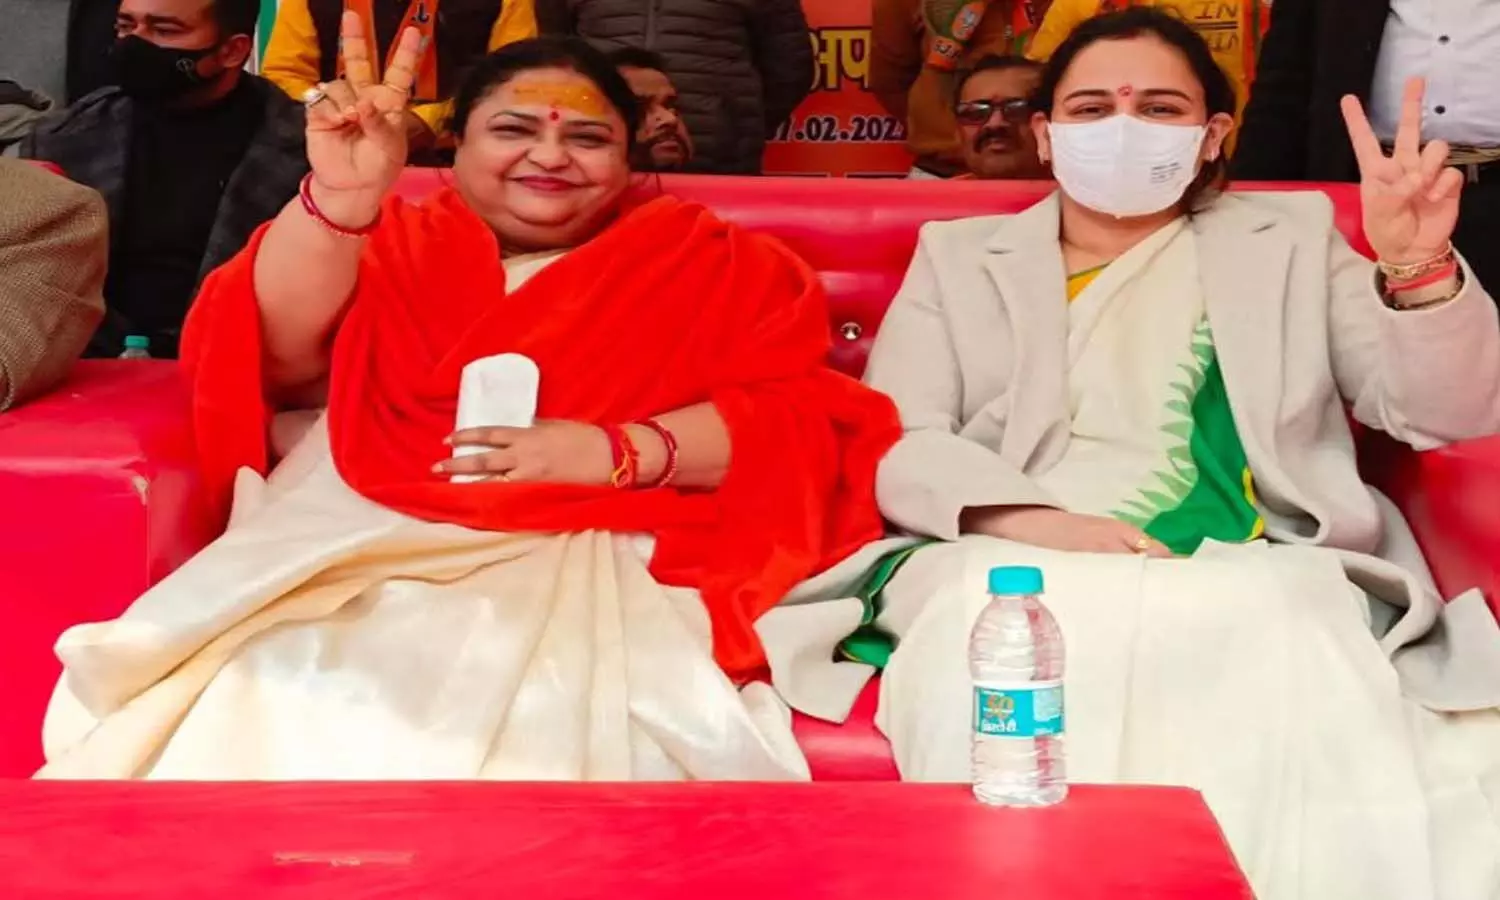 UP Election 2022: Aparna Yadav said - If you want a government that stops riots, then vote for BJP